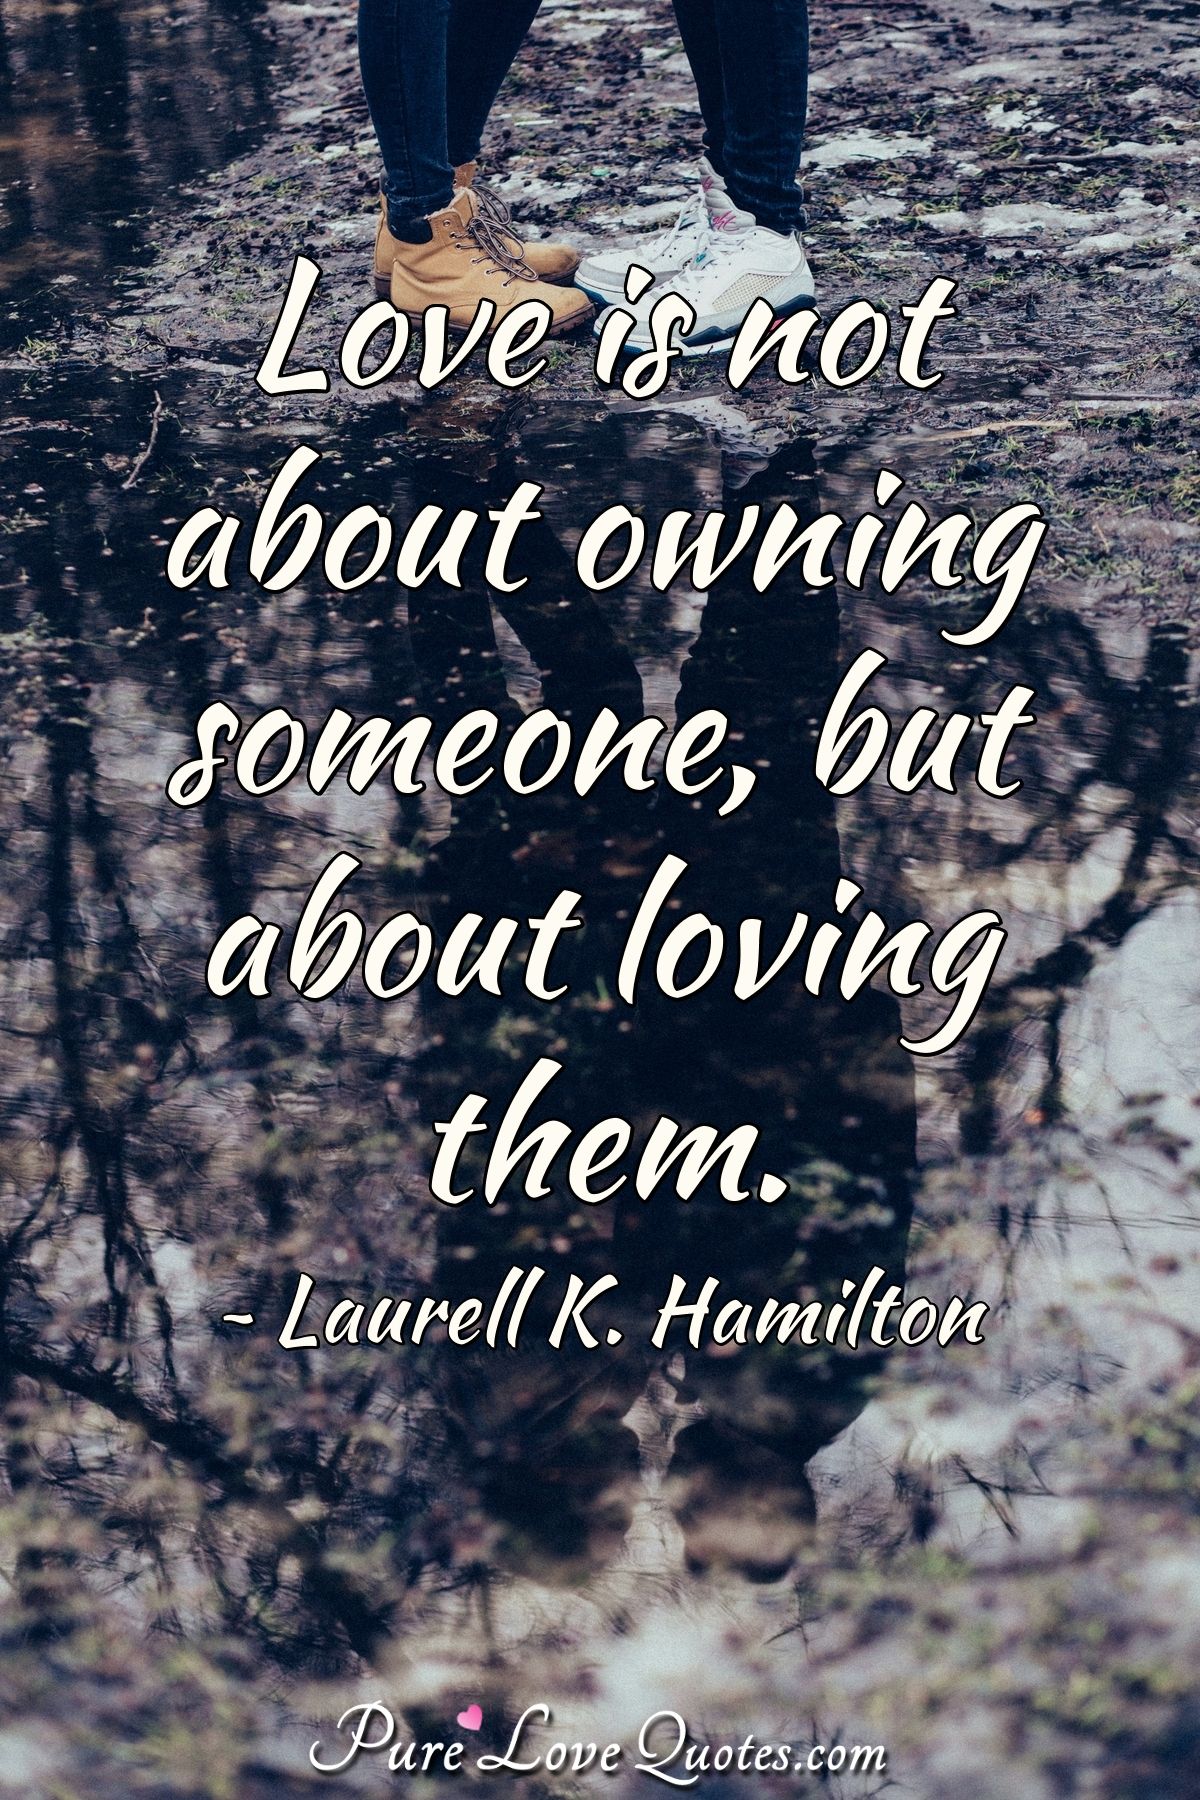 Love is not about owning someone, but about loving them. - Laurell K. Hamilton